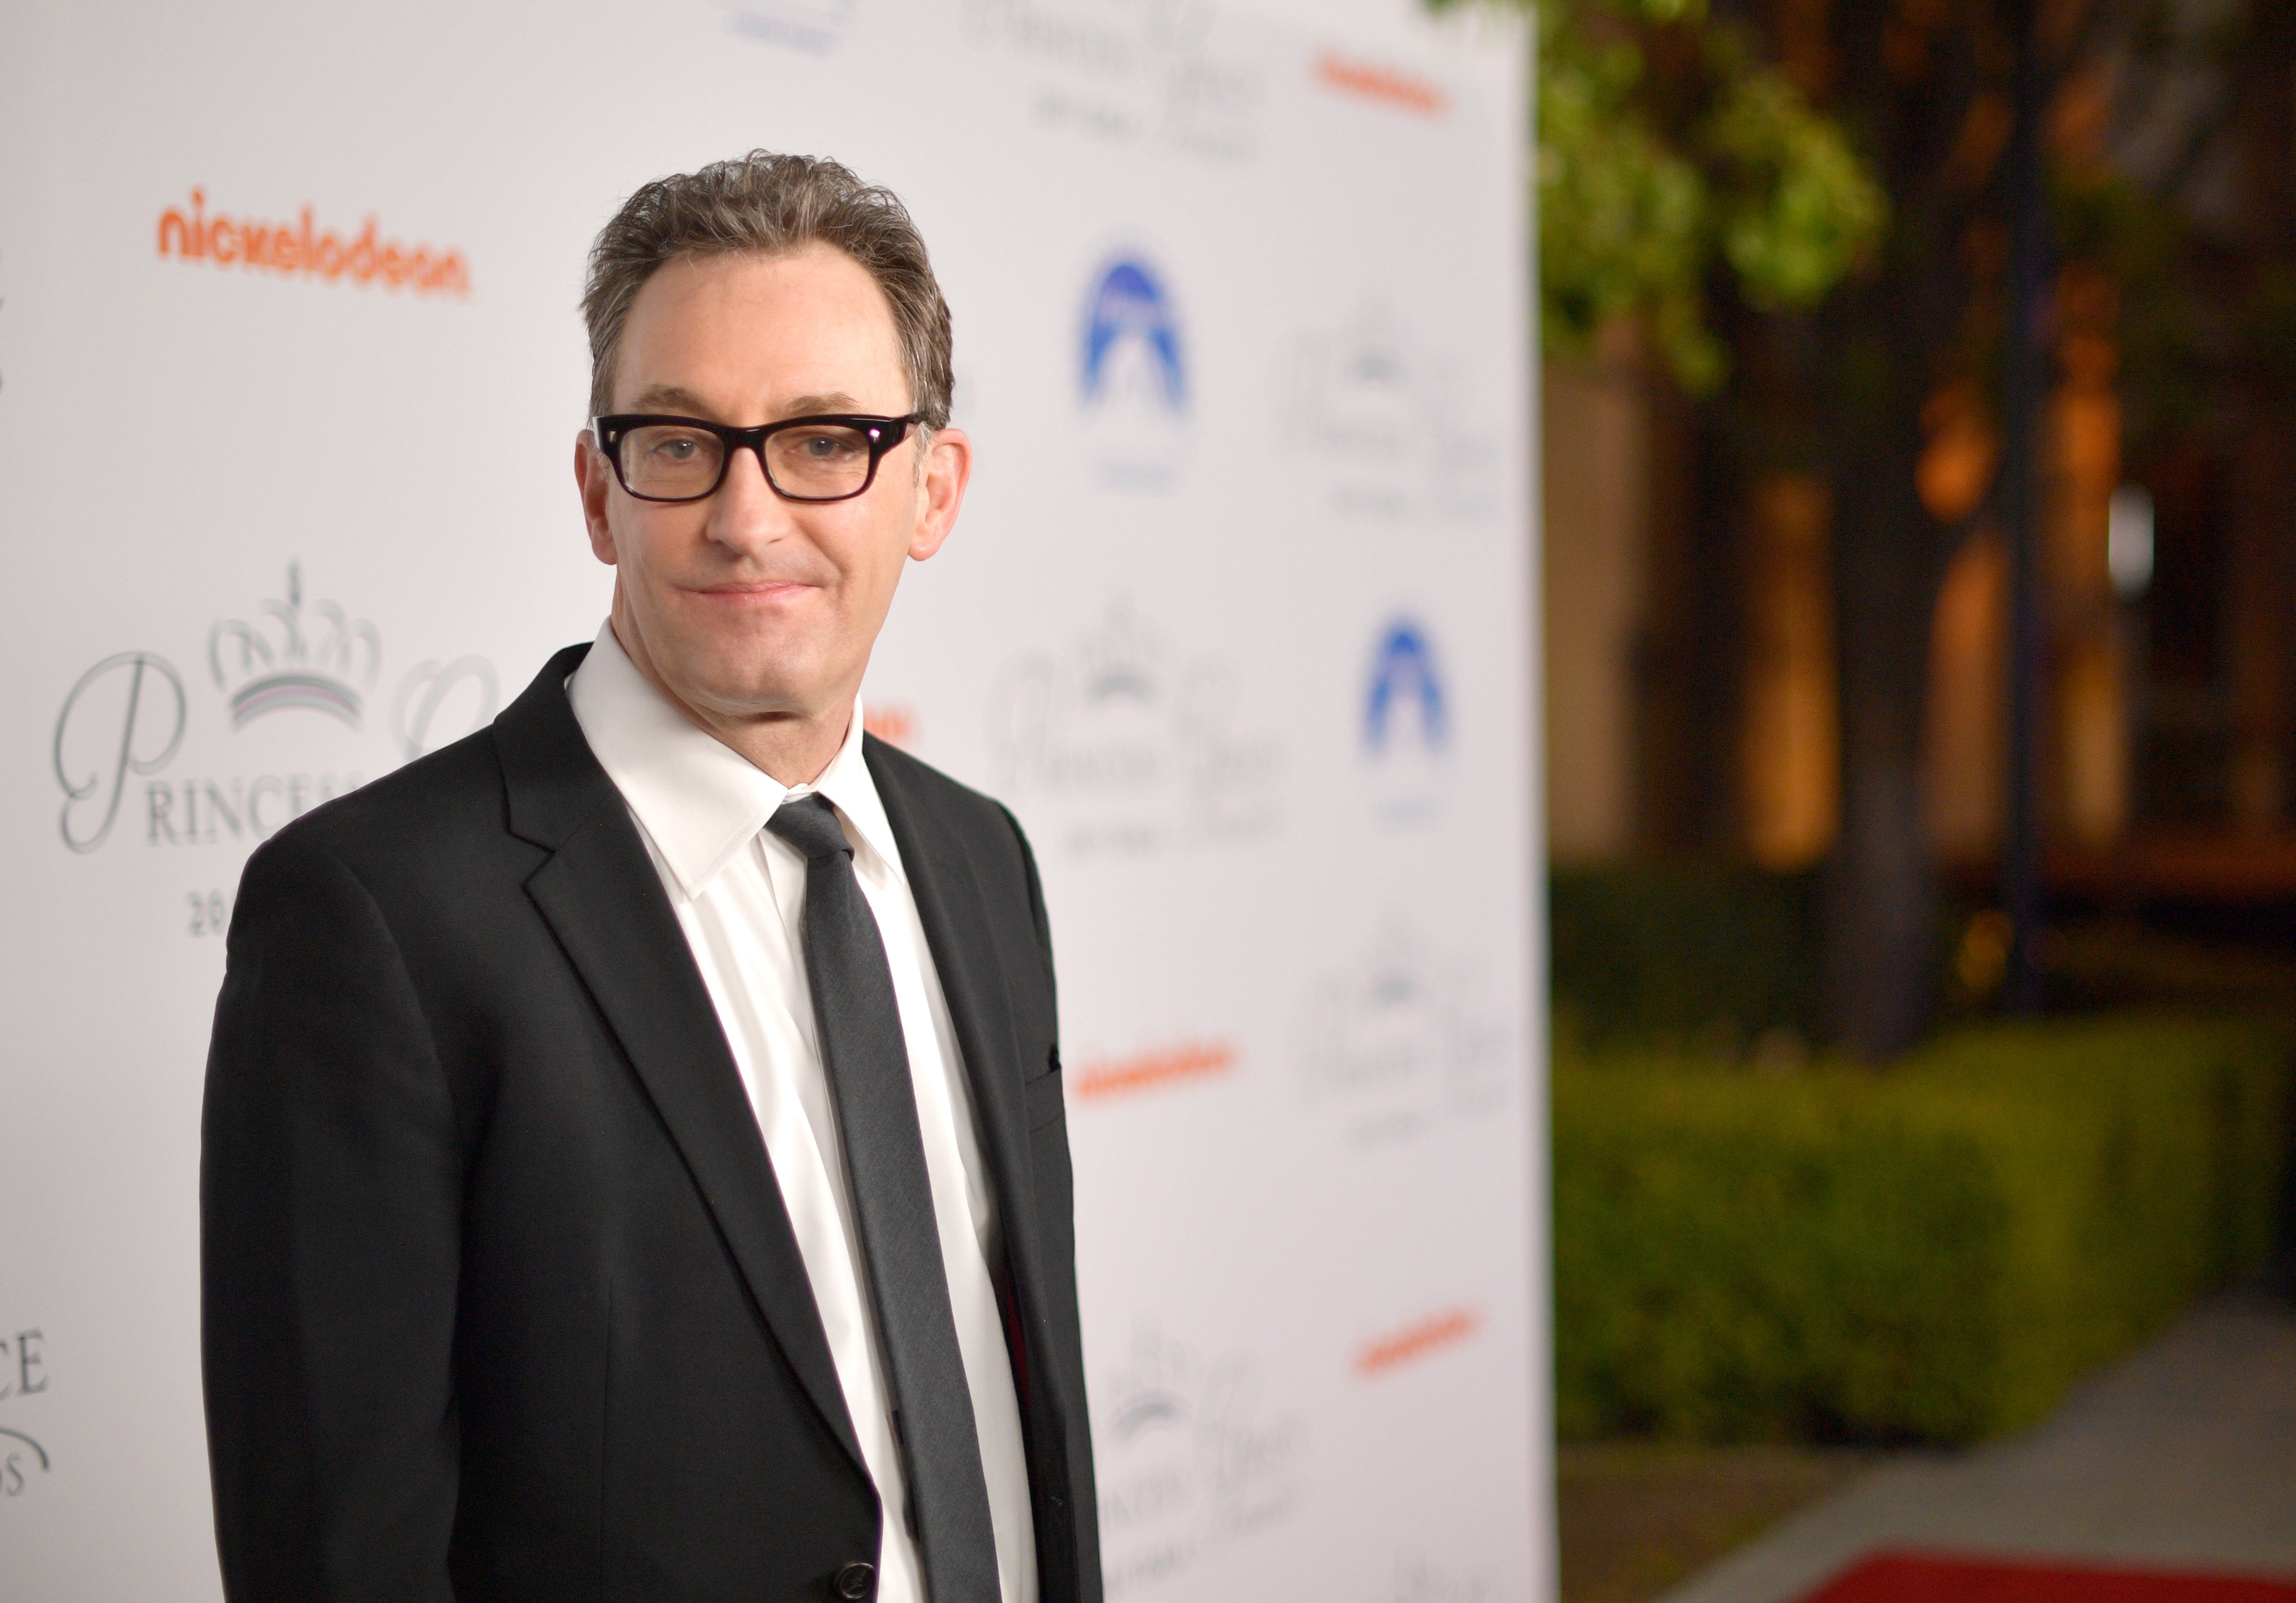 Tom Kenny attends the 2017 Princess Grace Awards Gala Kick Off Event with a special tribute to Stephen Hillenberg at Paramount Studios on October 24, 2017 in Hollywood, California | Photo: GettyImages